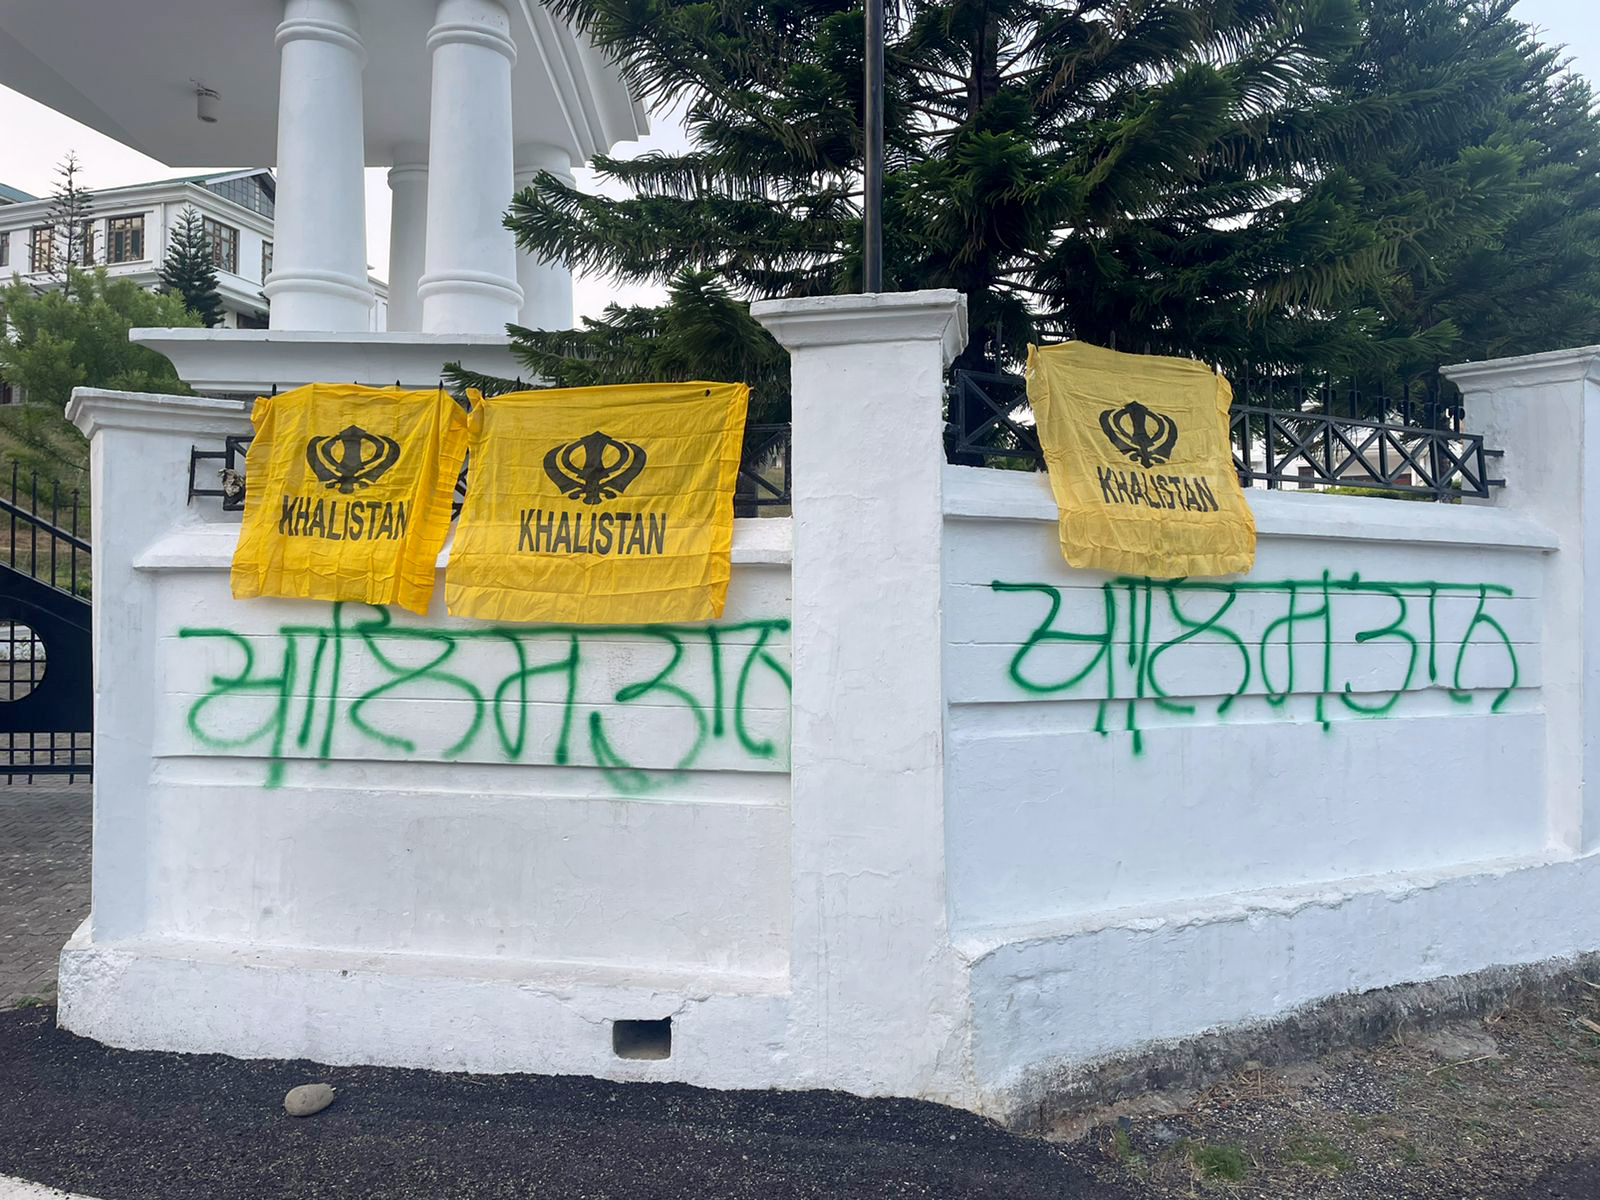 India strongly condemns defacing of Hindu temple in US with pro-Khalistani graffiti